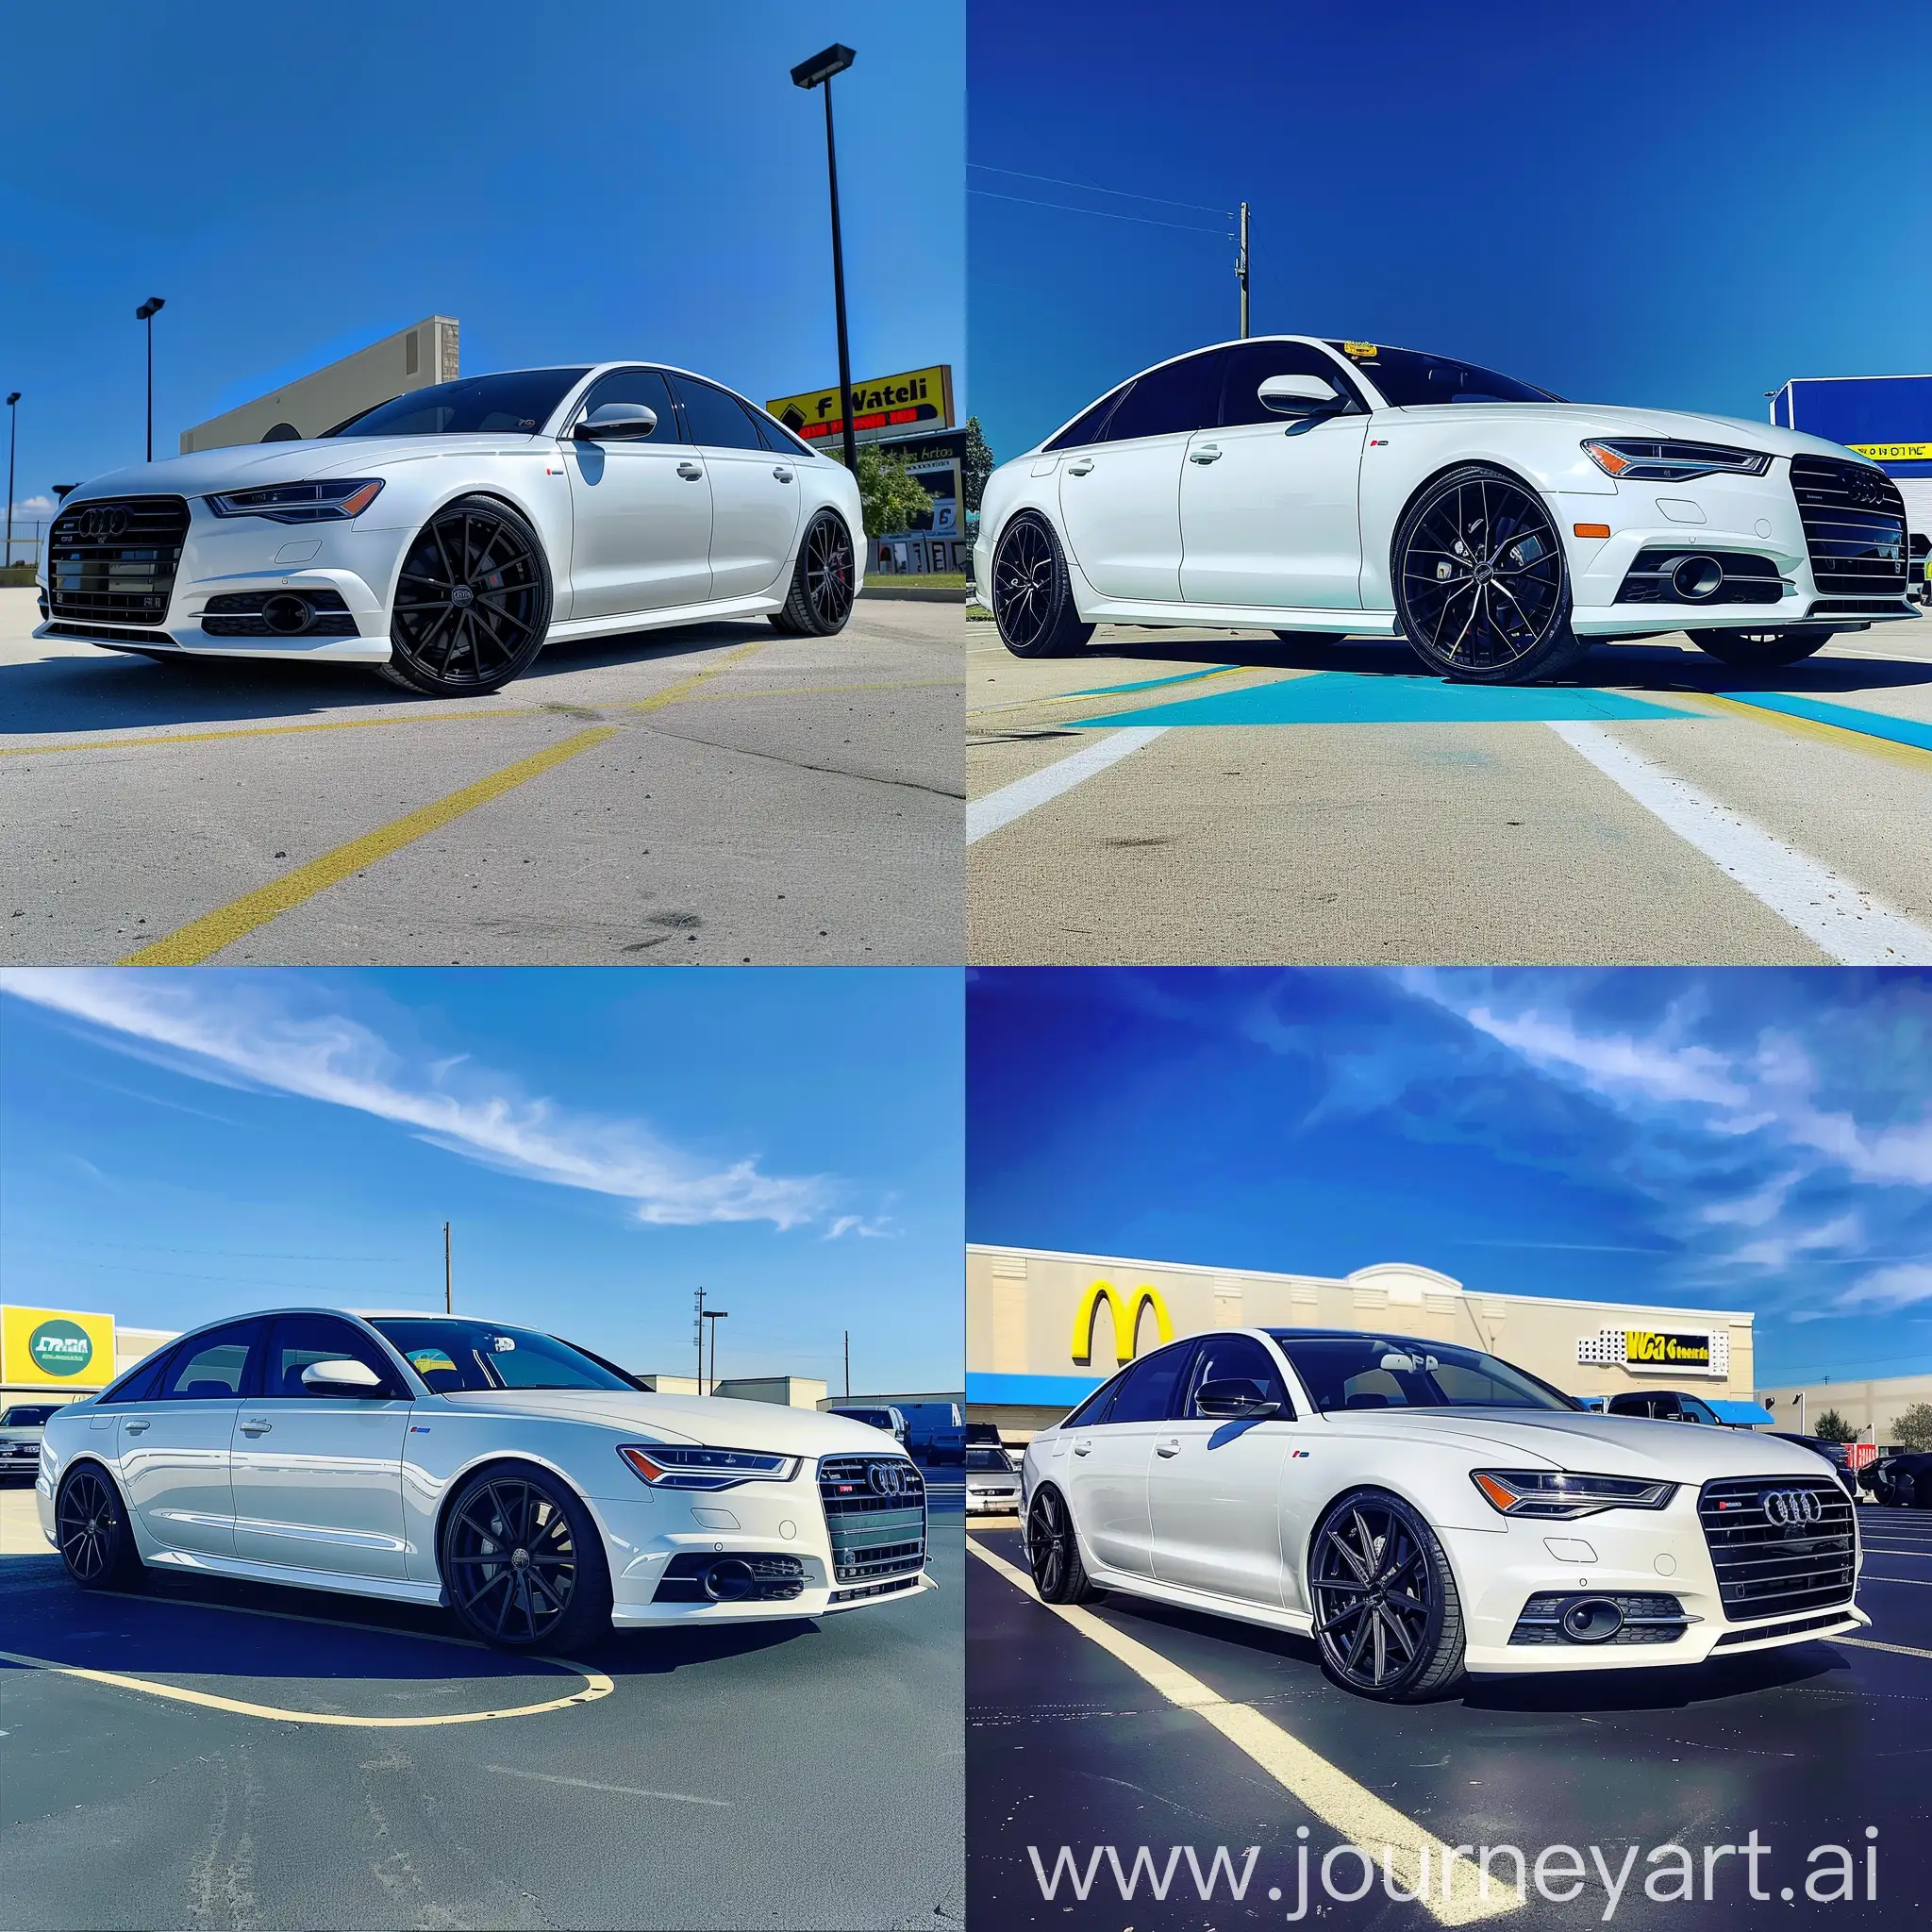 Snapchat-Style-Photo-of-White-Audi-A6-2015-with-Black-Rims-Parked-at-Walmart-under-Blue-Sky